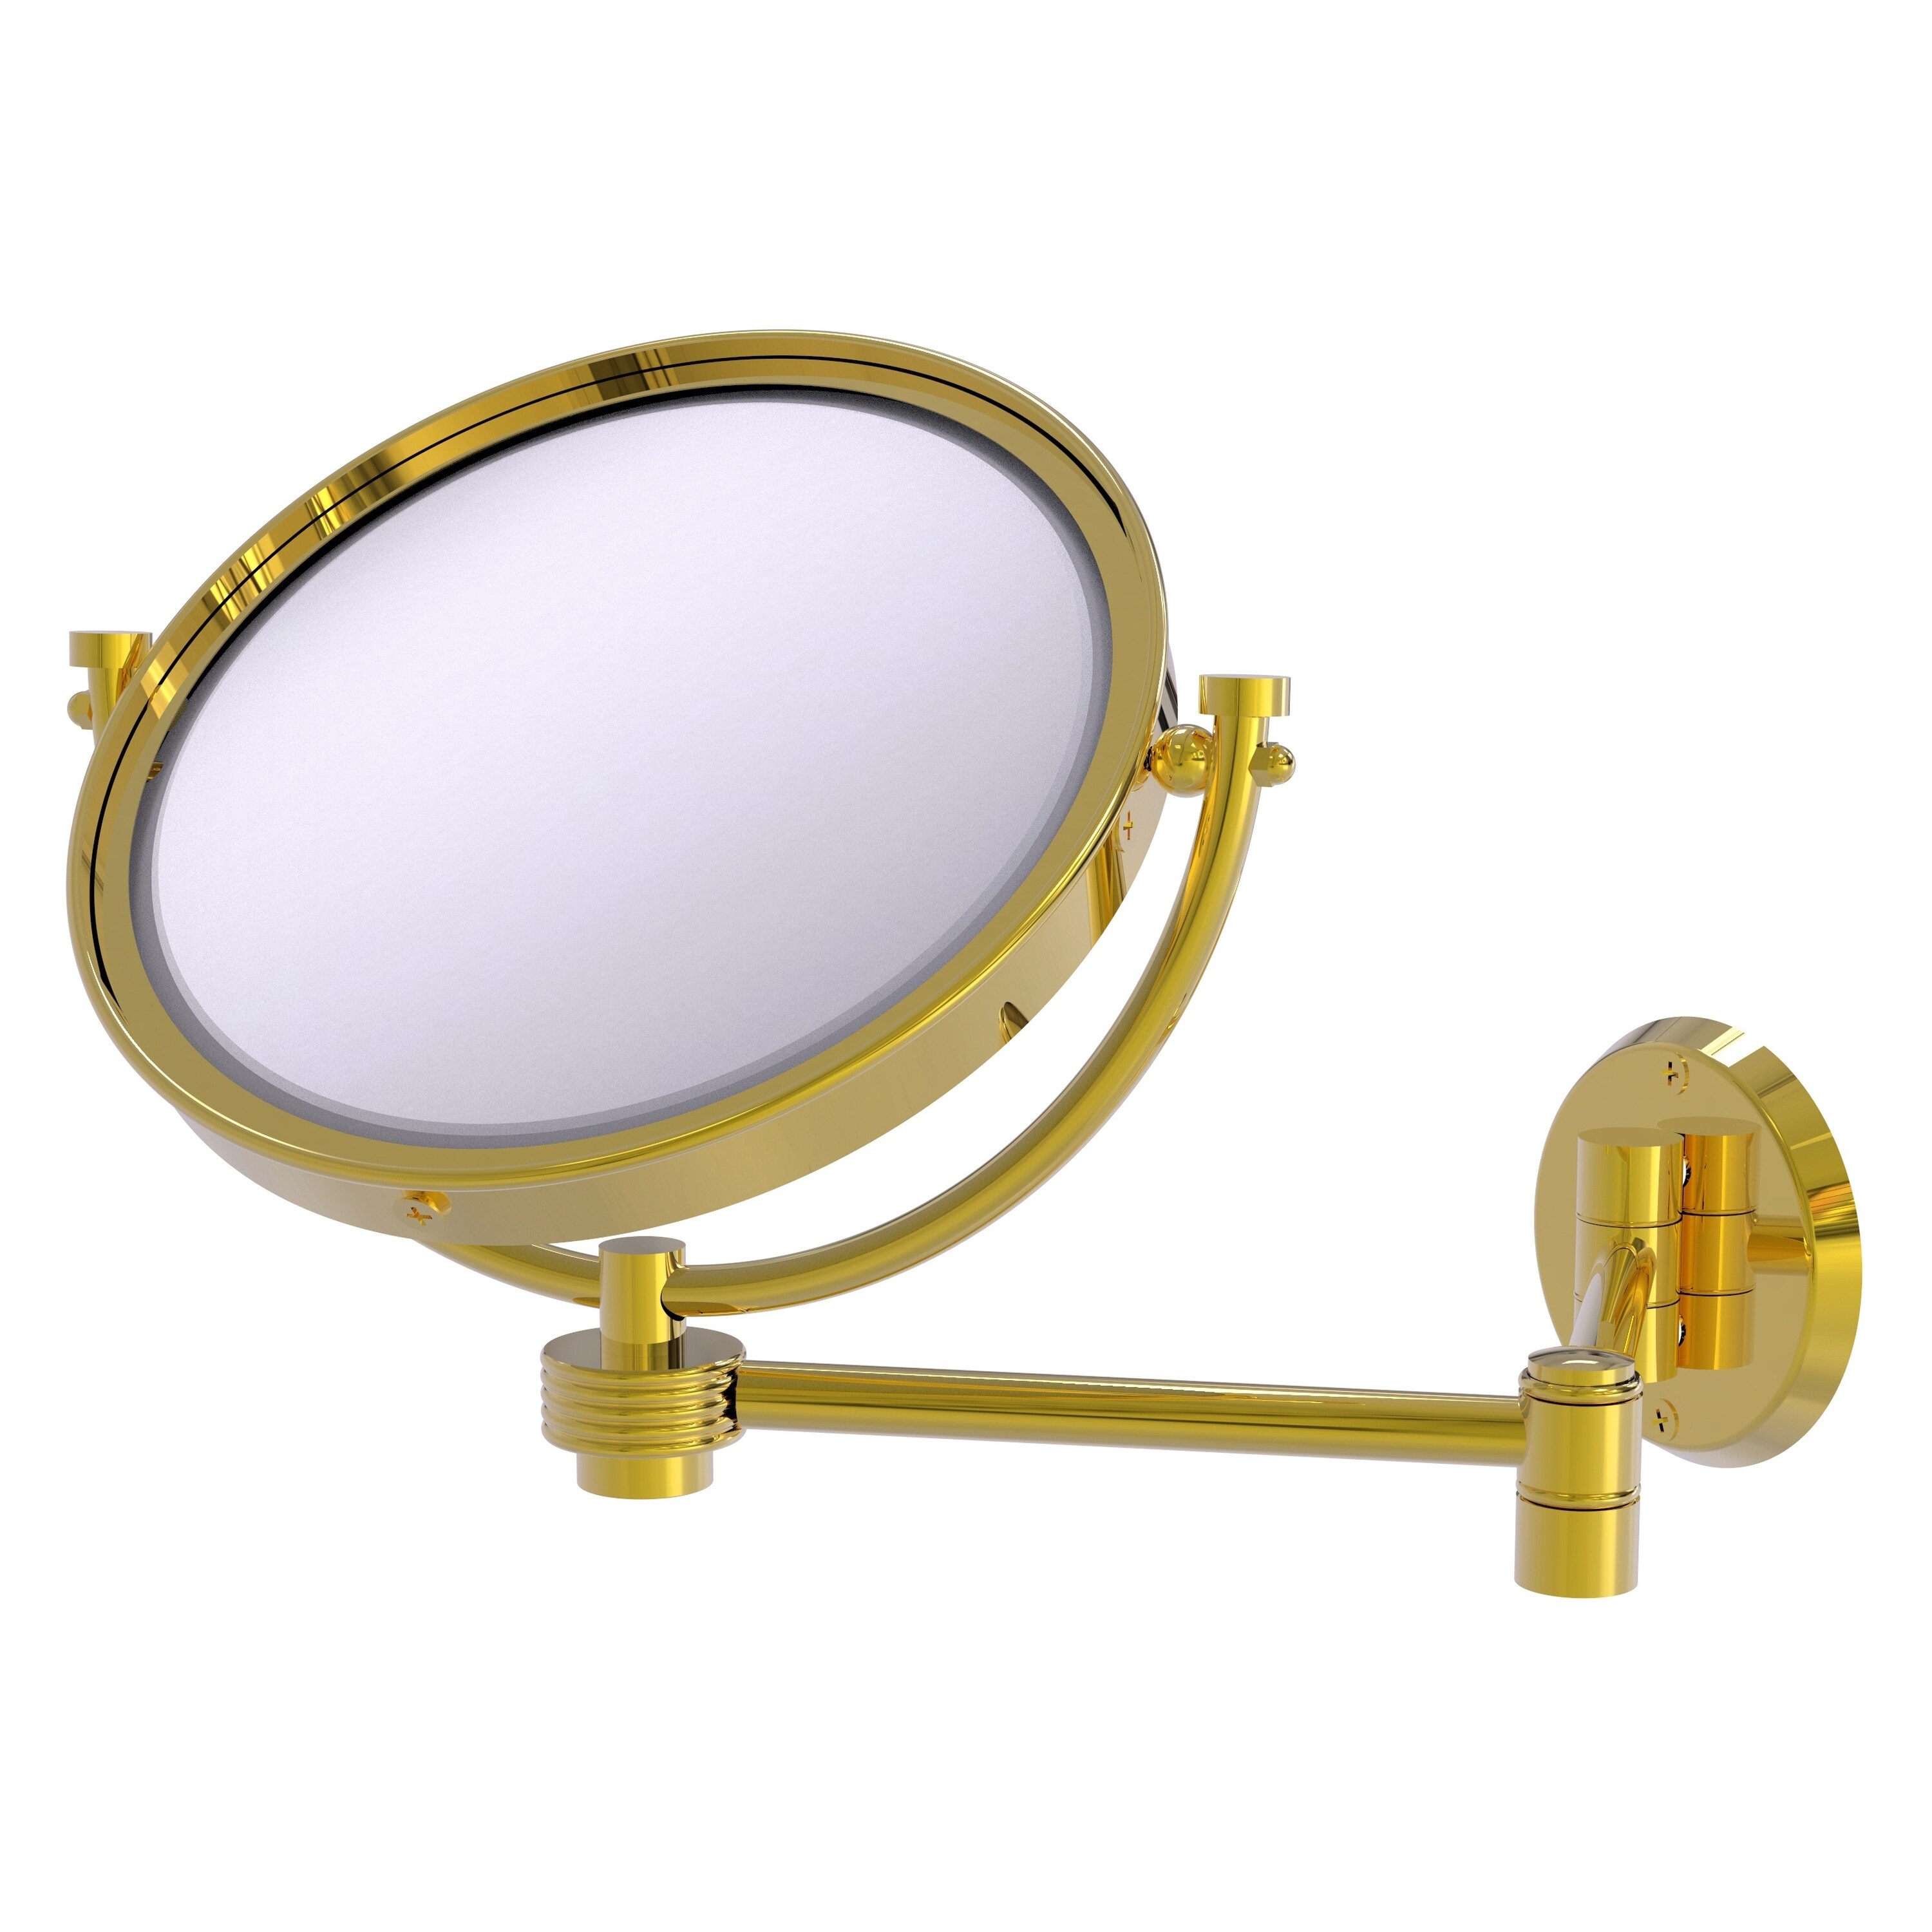 8-in x 10-in Polished Silver Double-sided 3X Magnifying Wall-mounted Vanity Mirror | - Allied Brass WM-6G/3X-PB